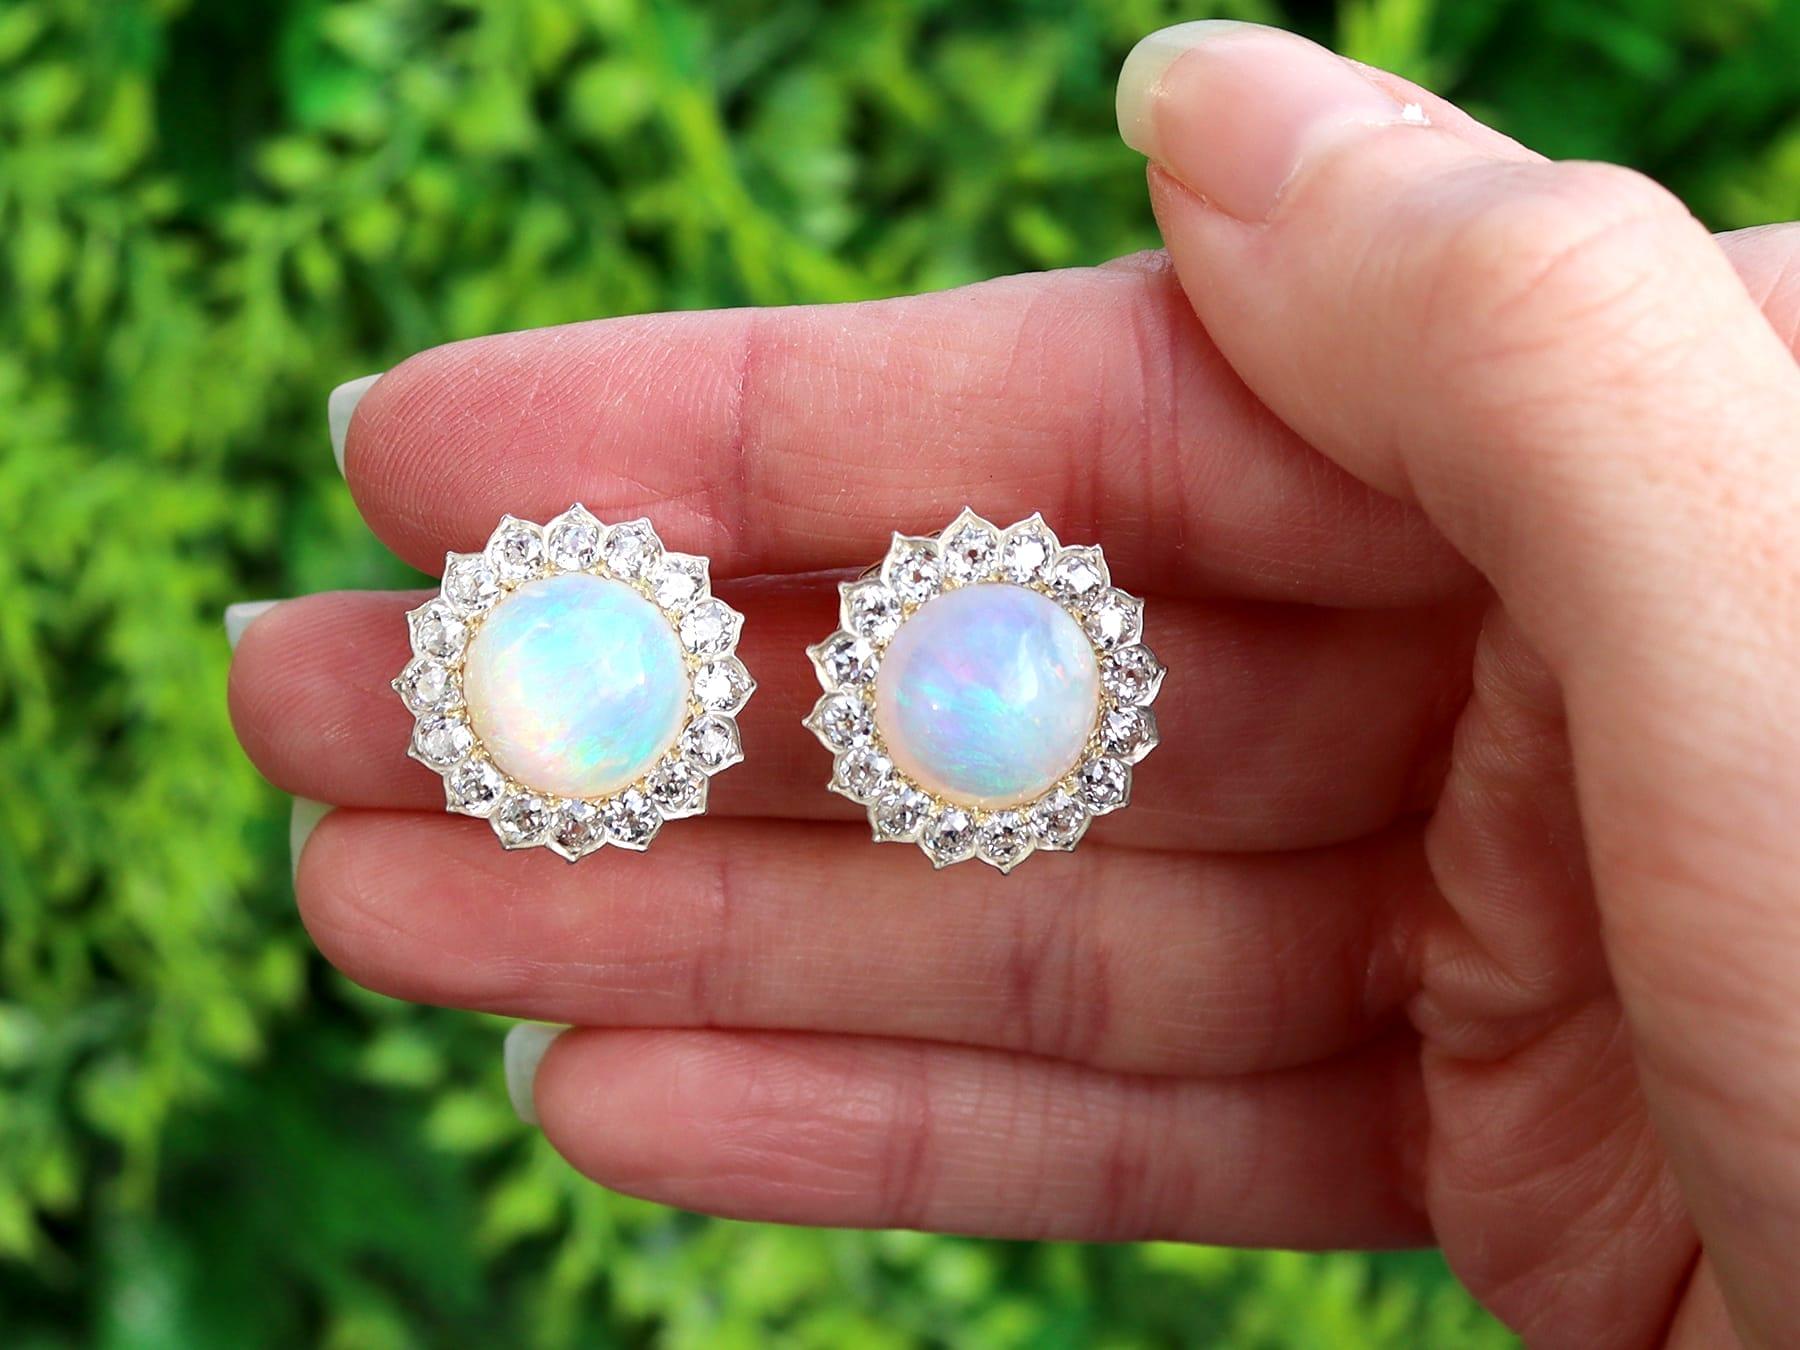 An impressive pair of 7.76 carat white opal and 2.05 carat diamond, 9 karat yellow gold and 9 karat white gold set clip on earrings; part of our diverse antique jewelry collections.

These fine and impressive Victorian cabochon cut opal earrings